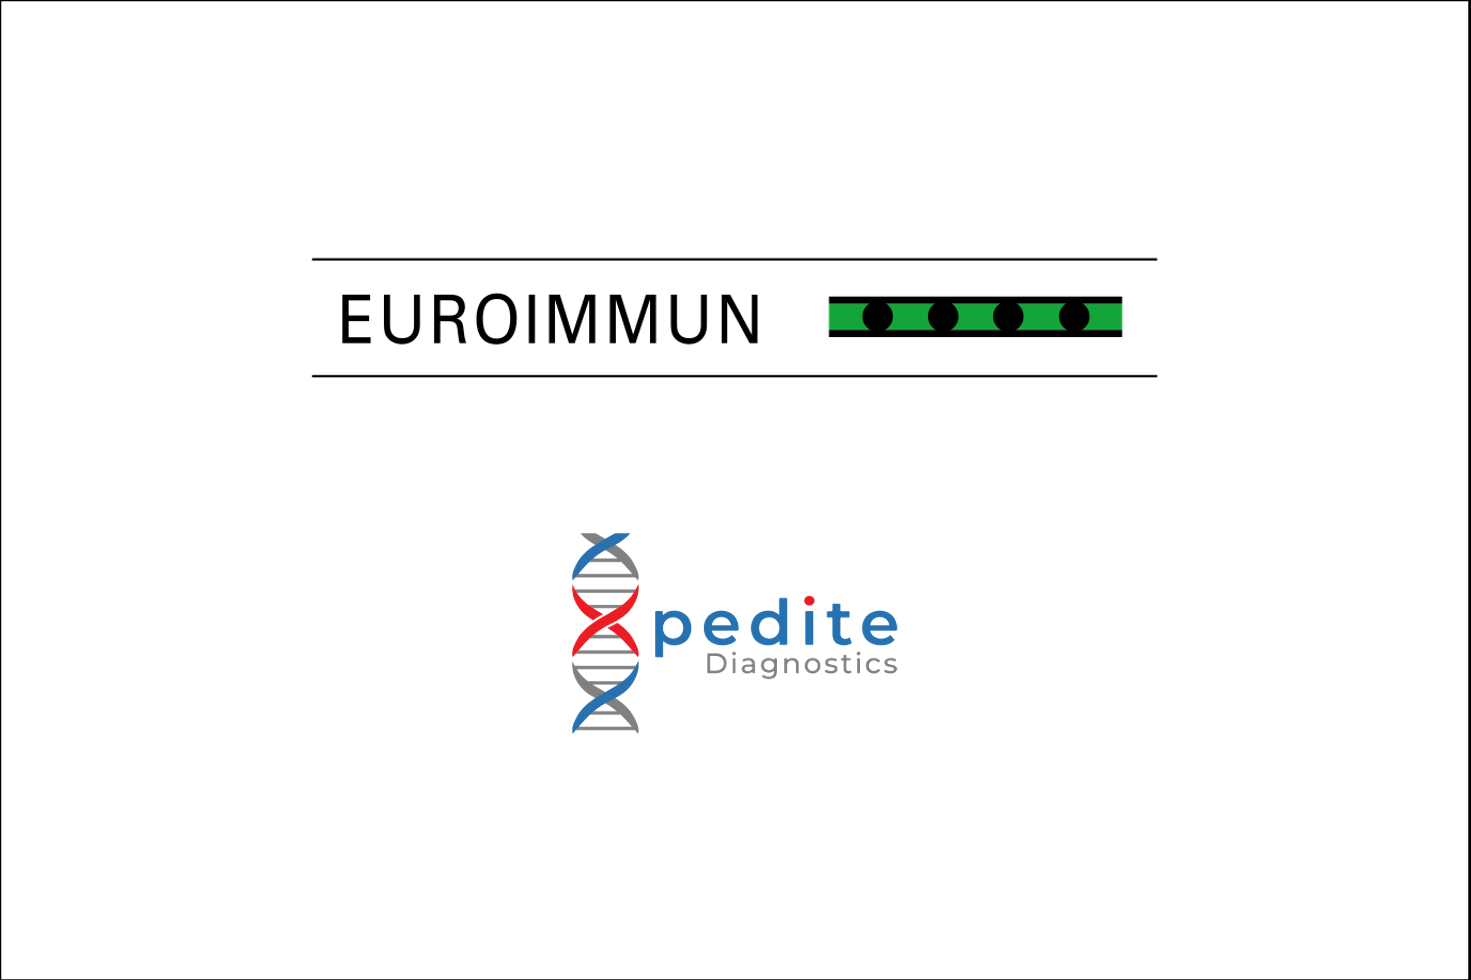 Euroimmun, Xpedite Diagnostics Partner to Offer Point-of-Care DNA Extraction